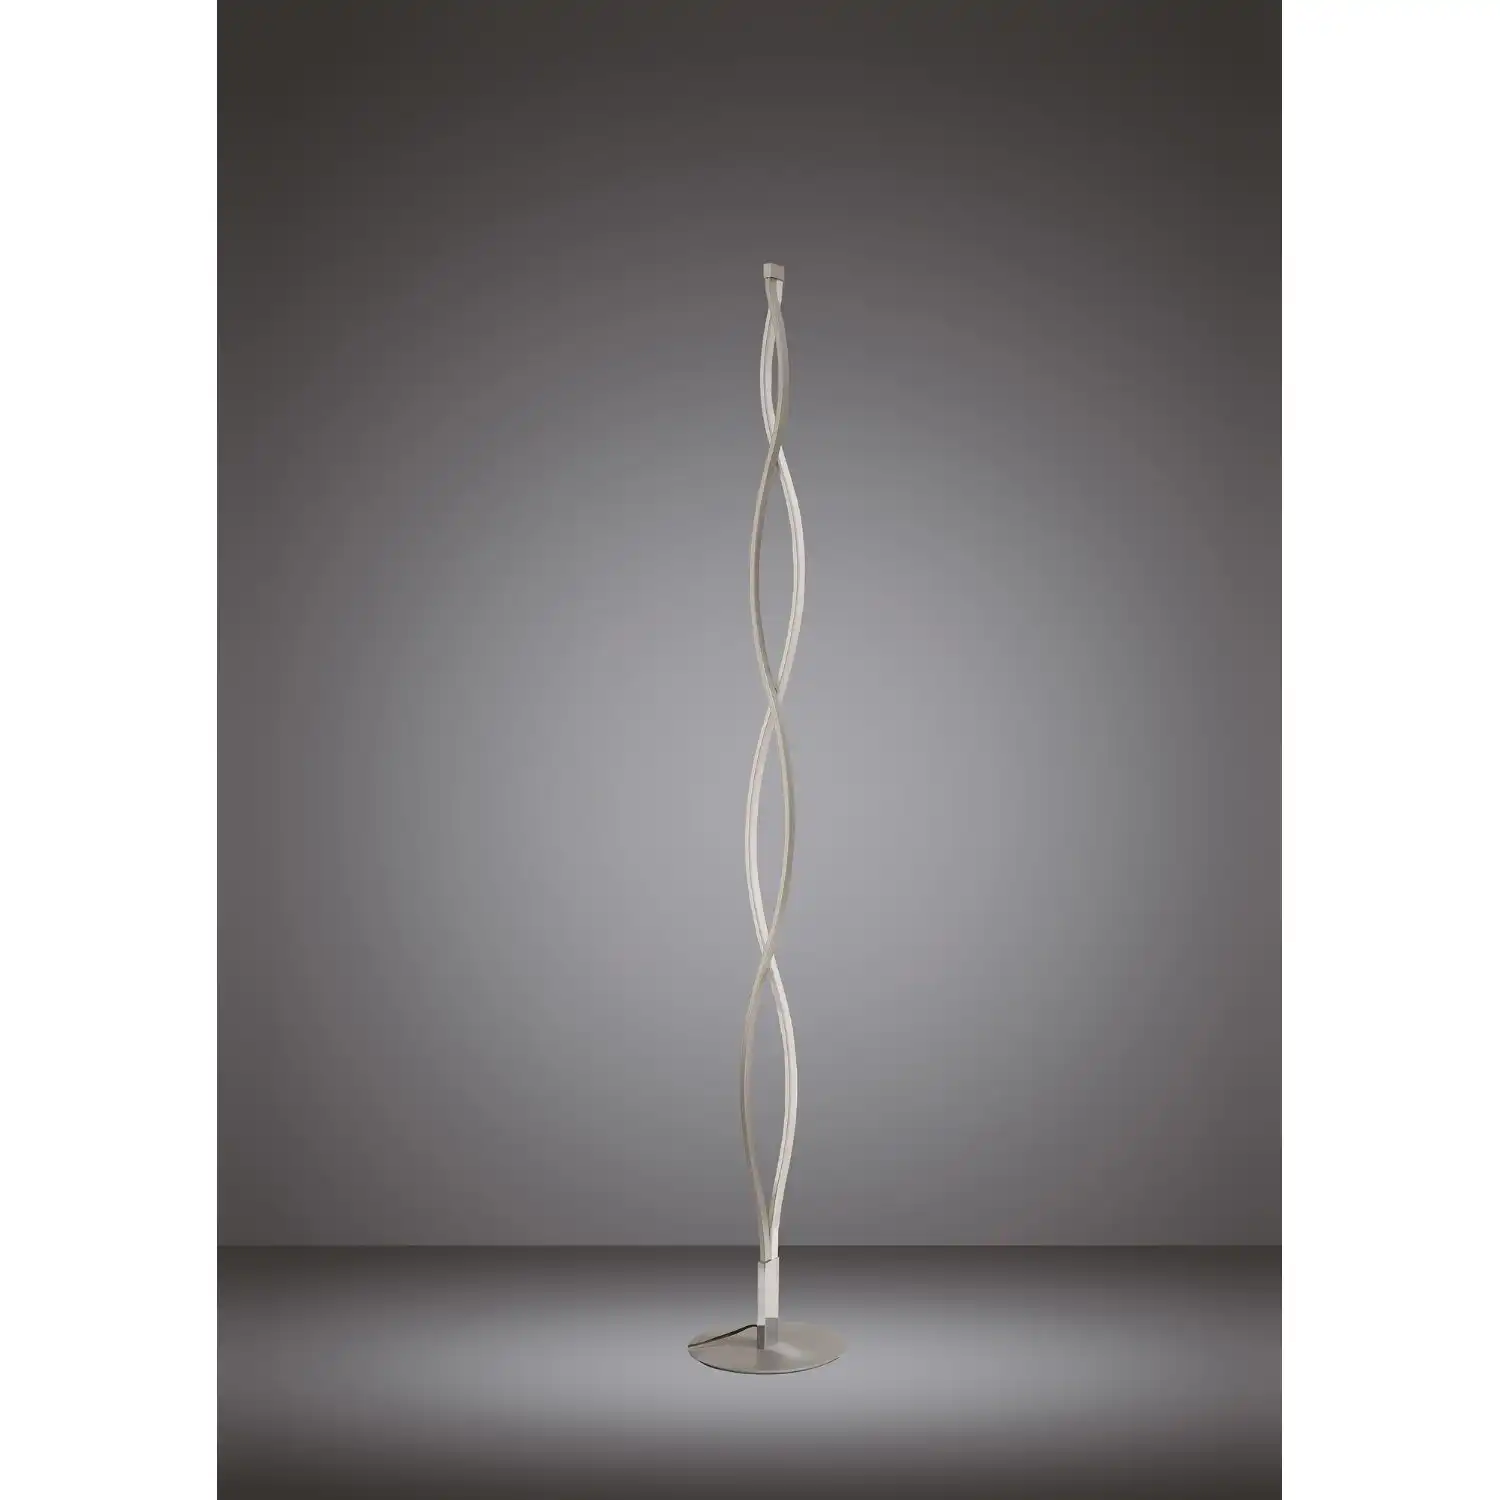 Sahara XL Floor Lamp 28W LED 3000K, 2200lm, Dimmable Silver Frosted Acrylic Polished Chrome, 3yrs Warranty